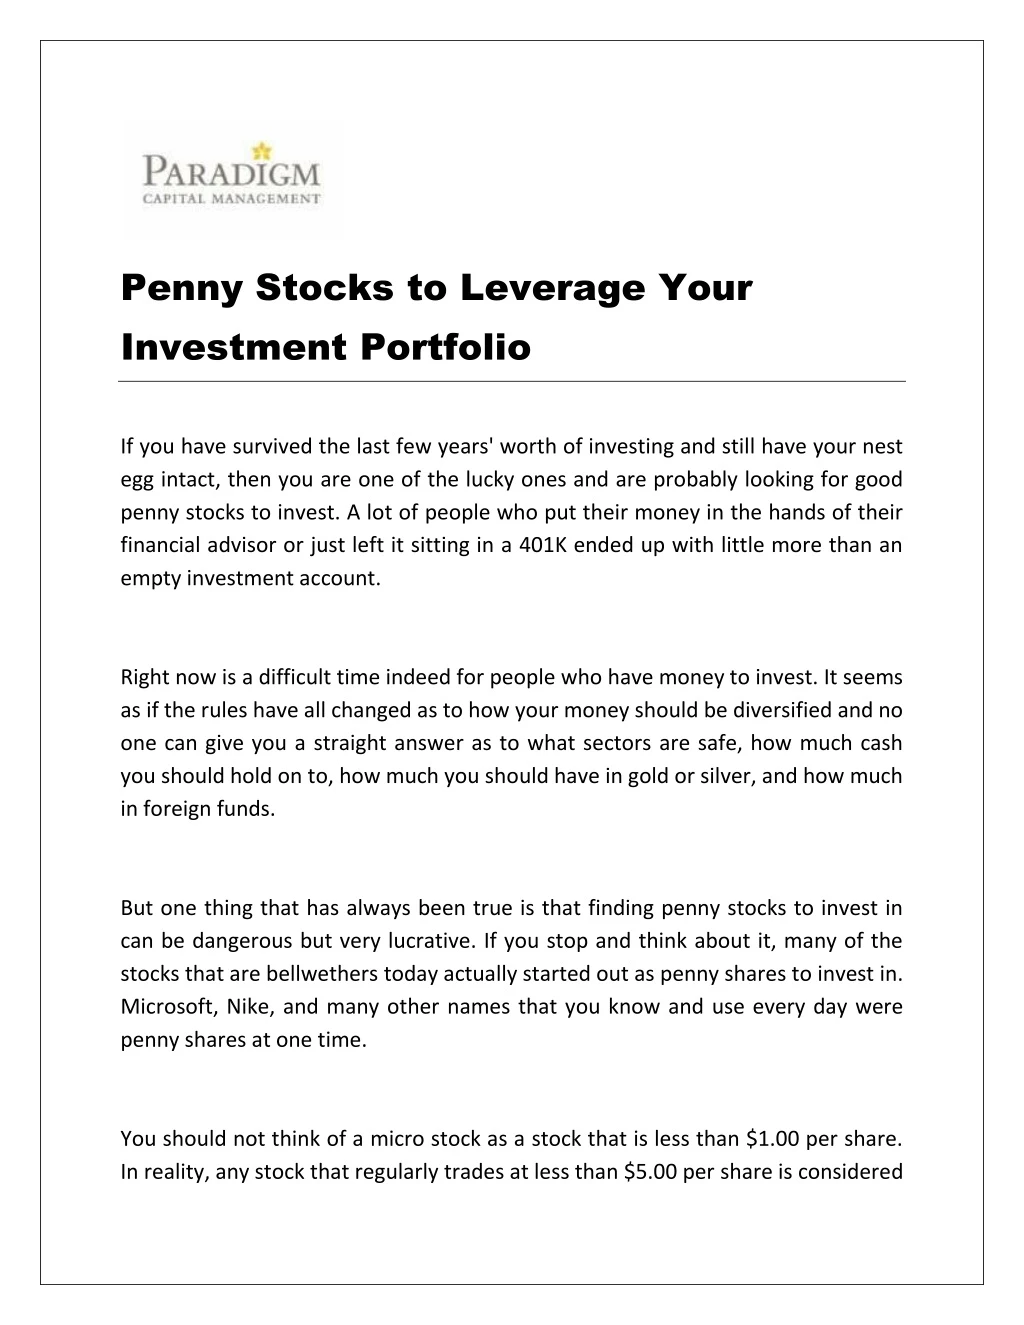 penny stocks to leverage your investment portfolio n.